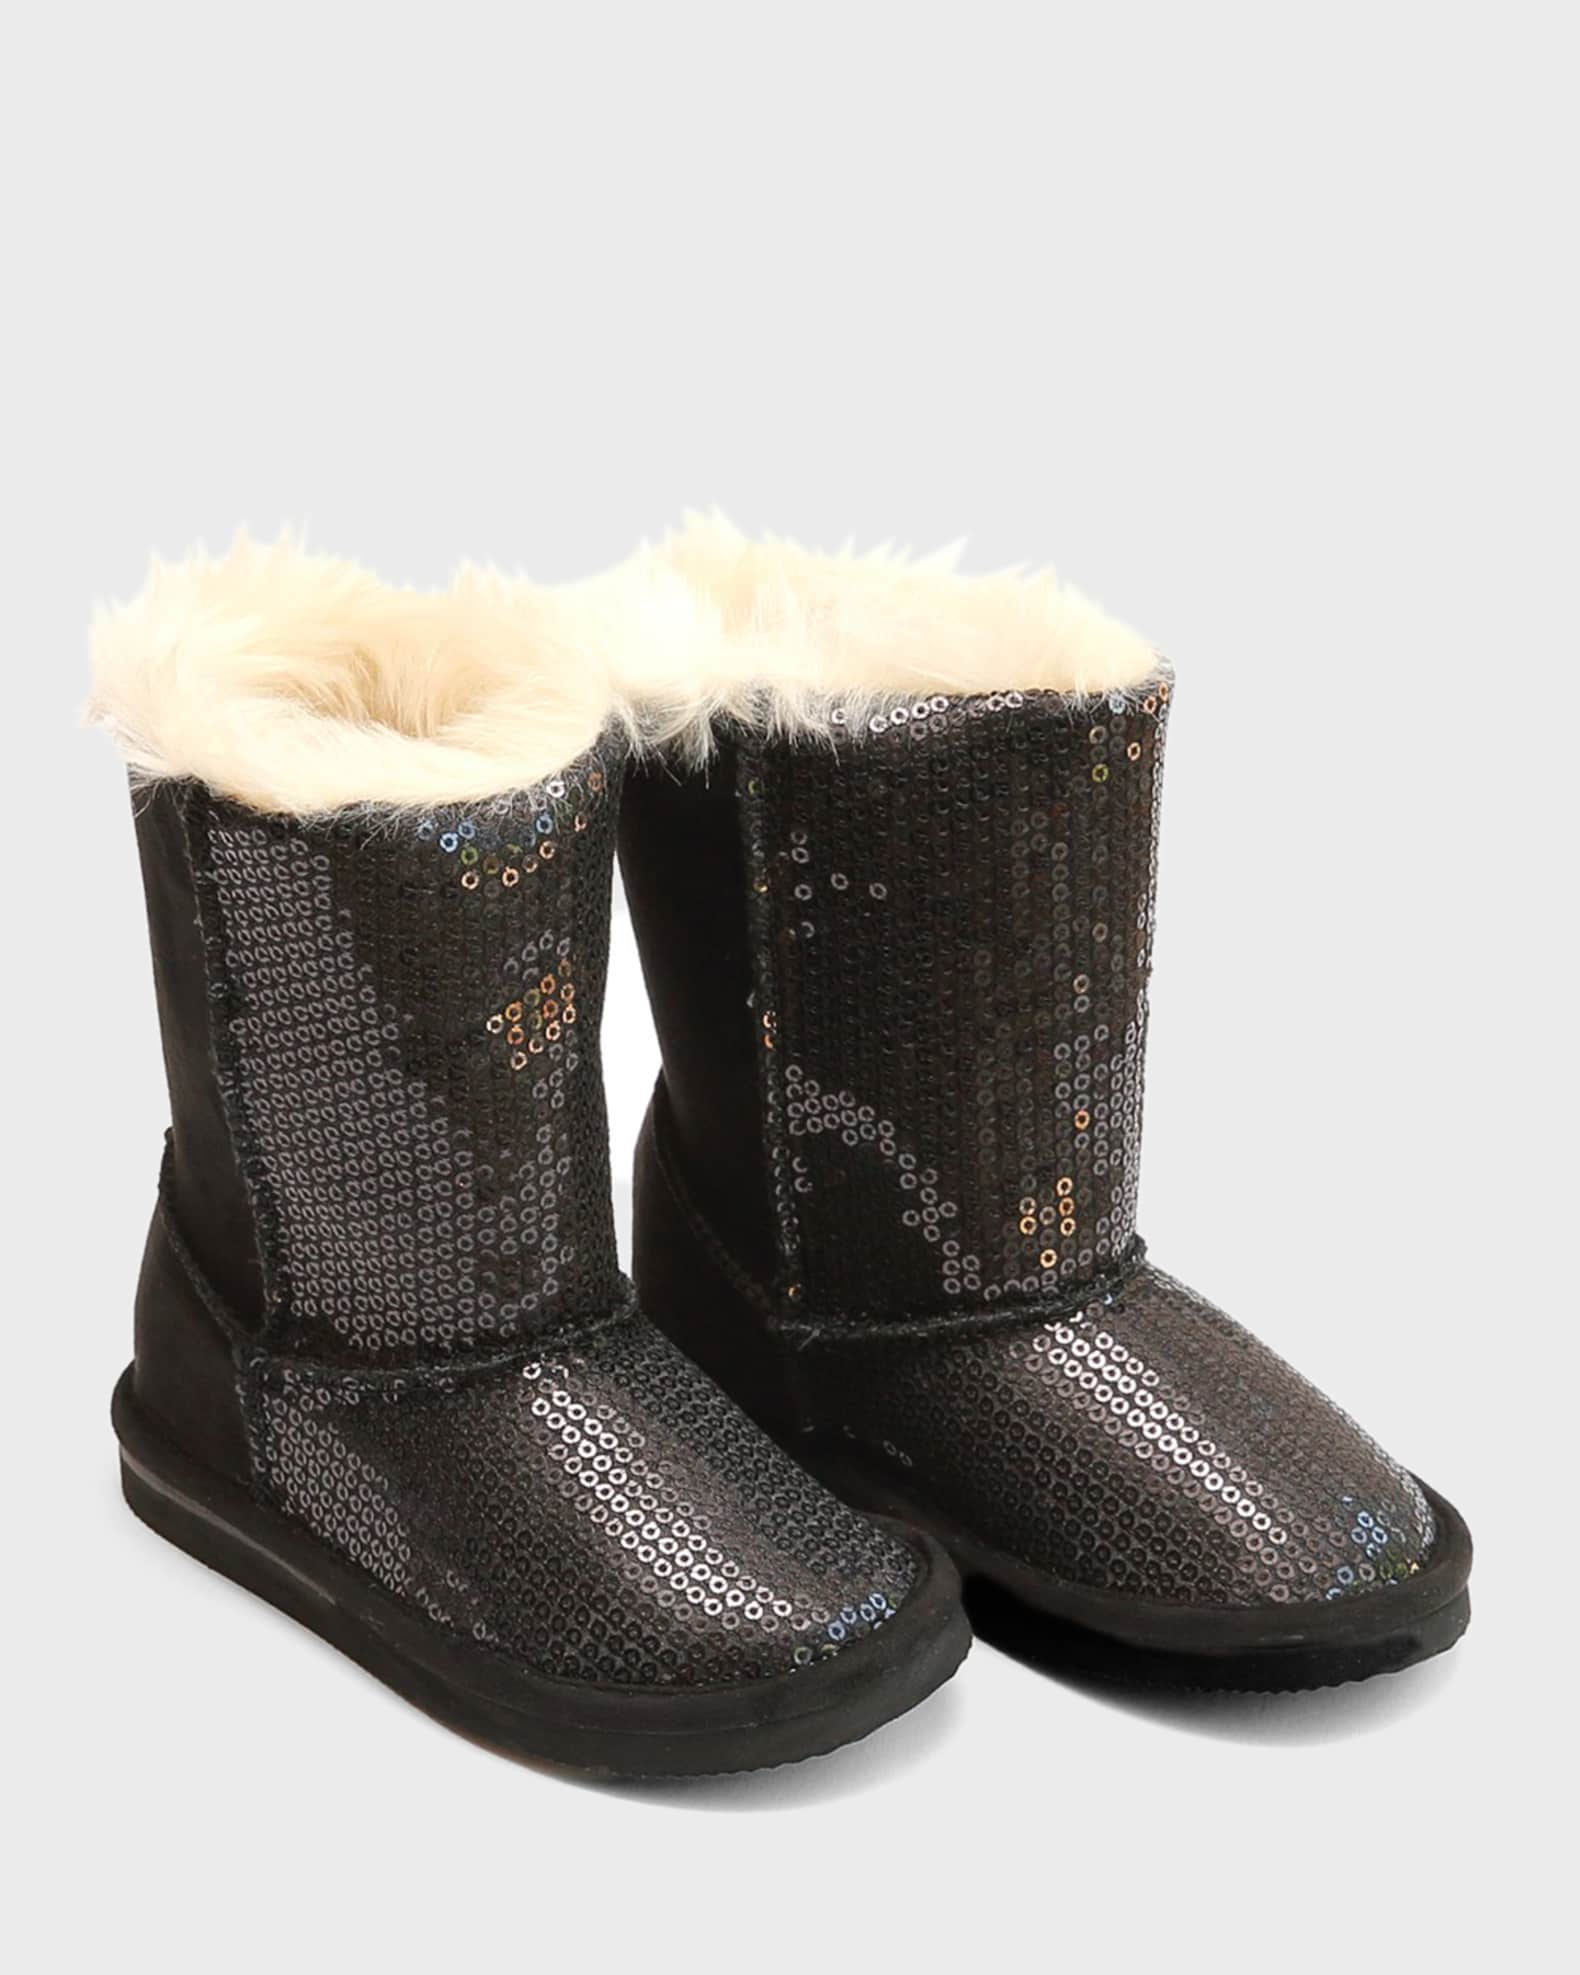 L'Amour Shoes Carol Sequin Boots w/ Faux-Fur Lining, Baby/Toddler/Kids ...